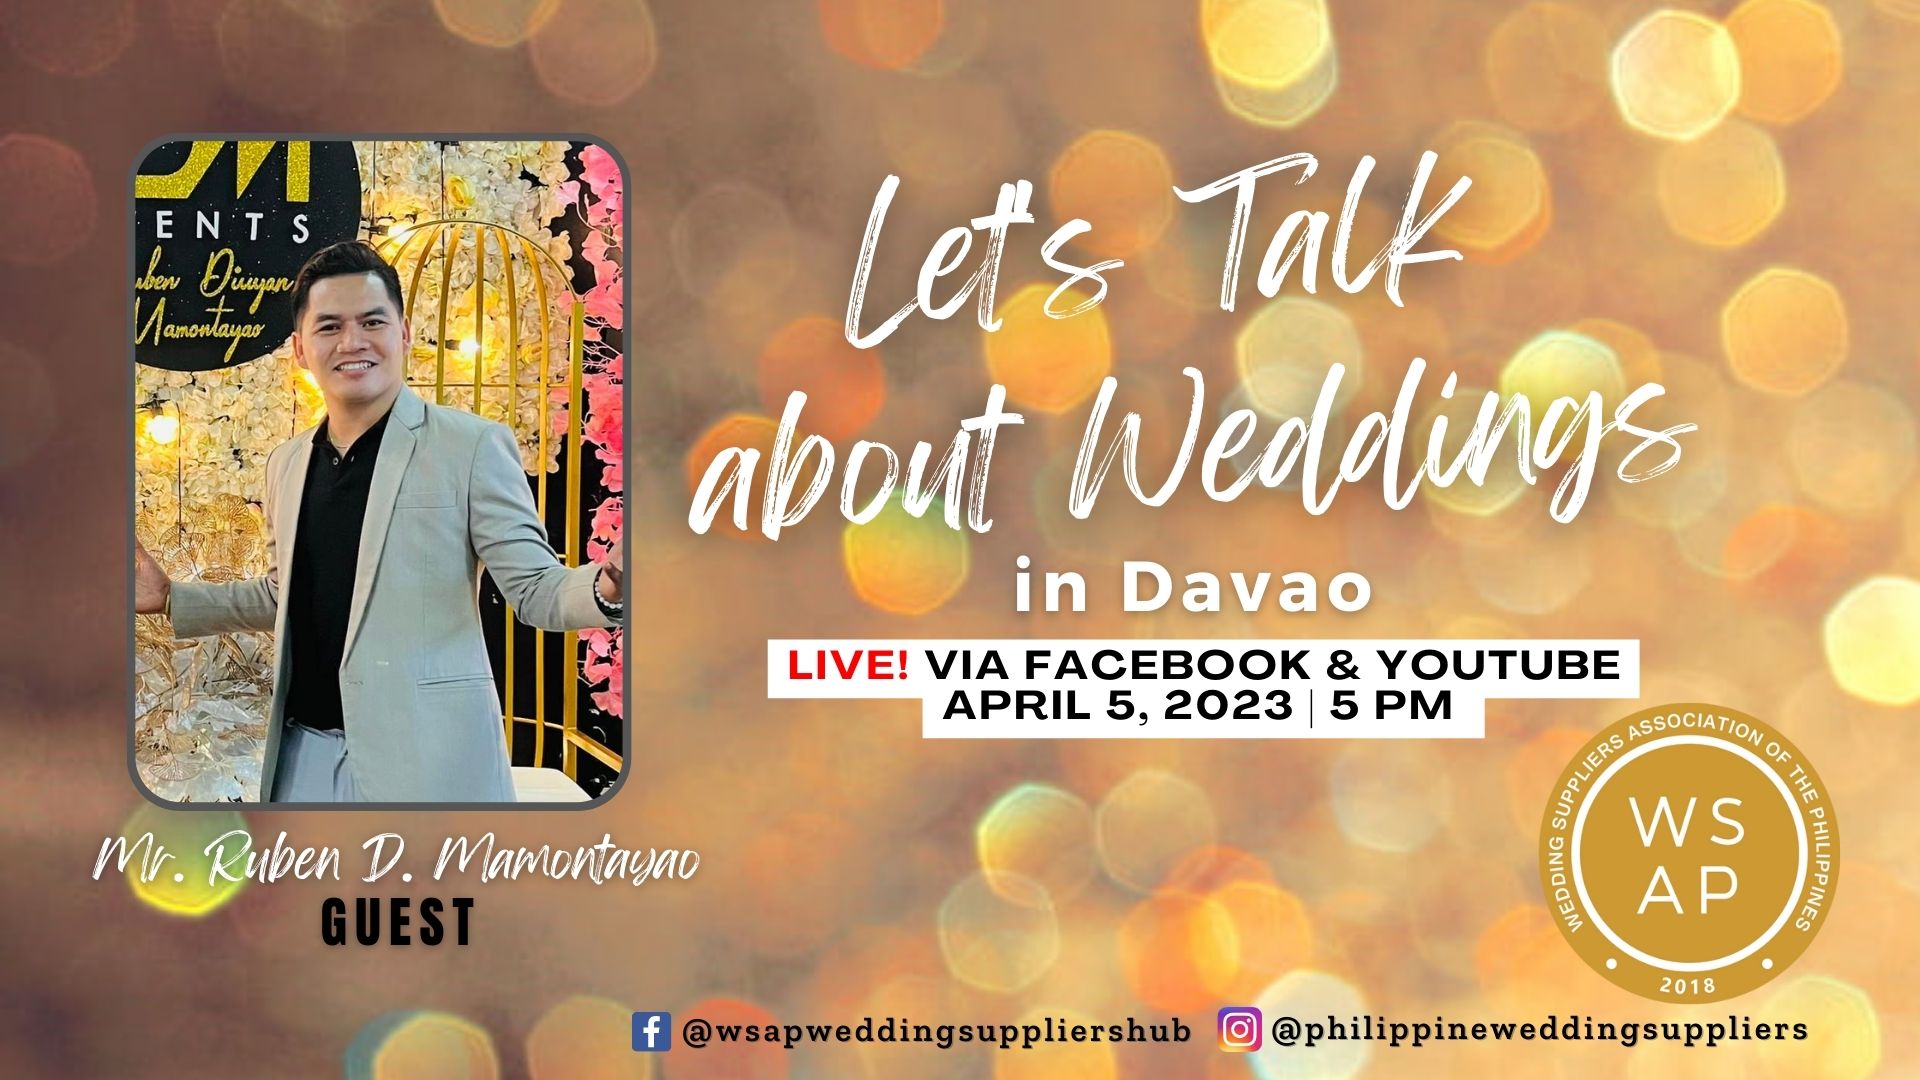 Let's Talk About Weddings with Mr. Ruben Mamontayao